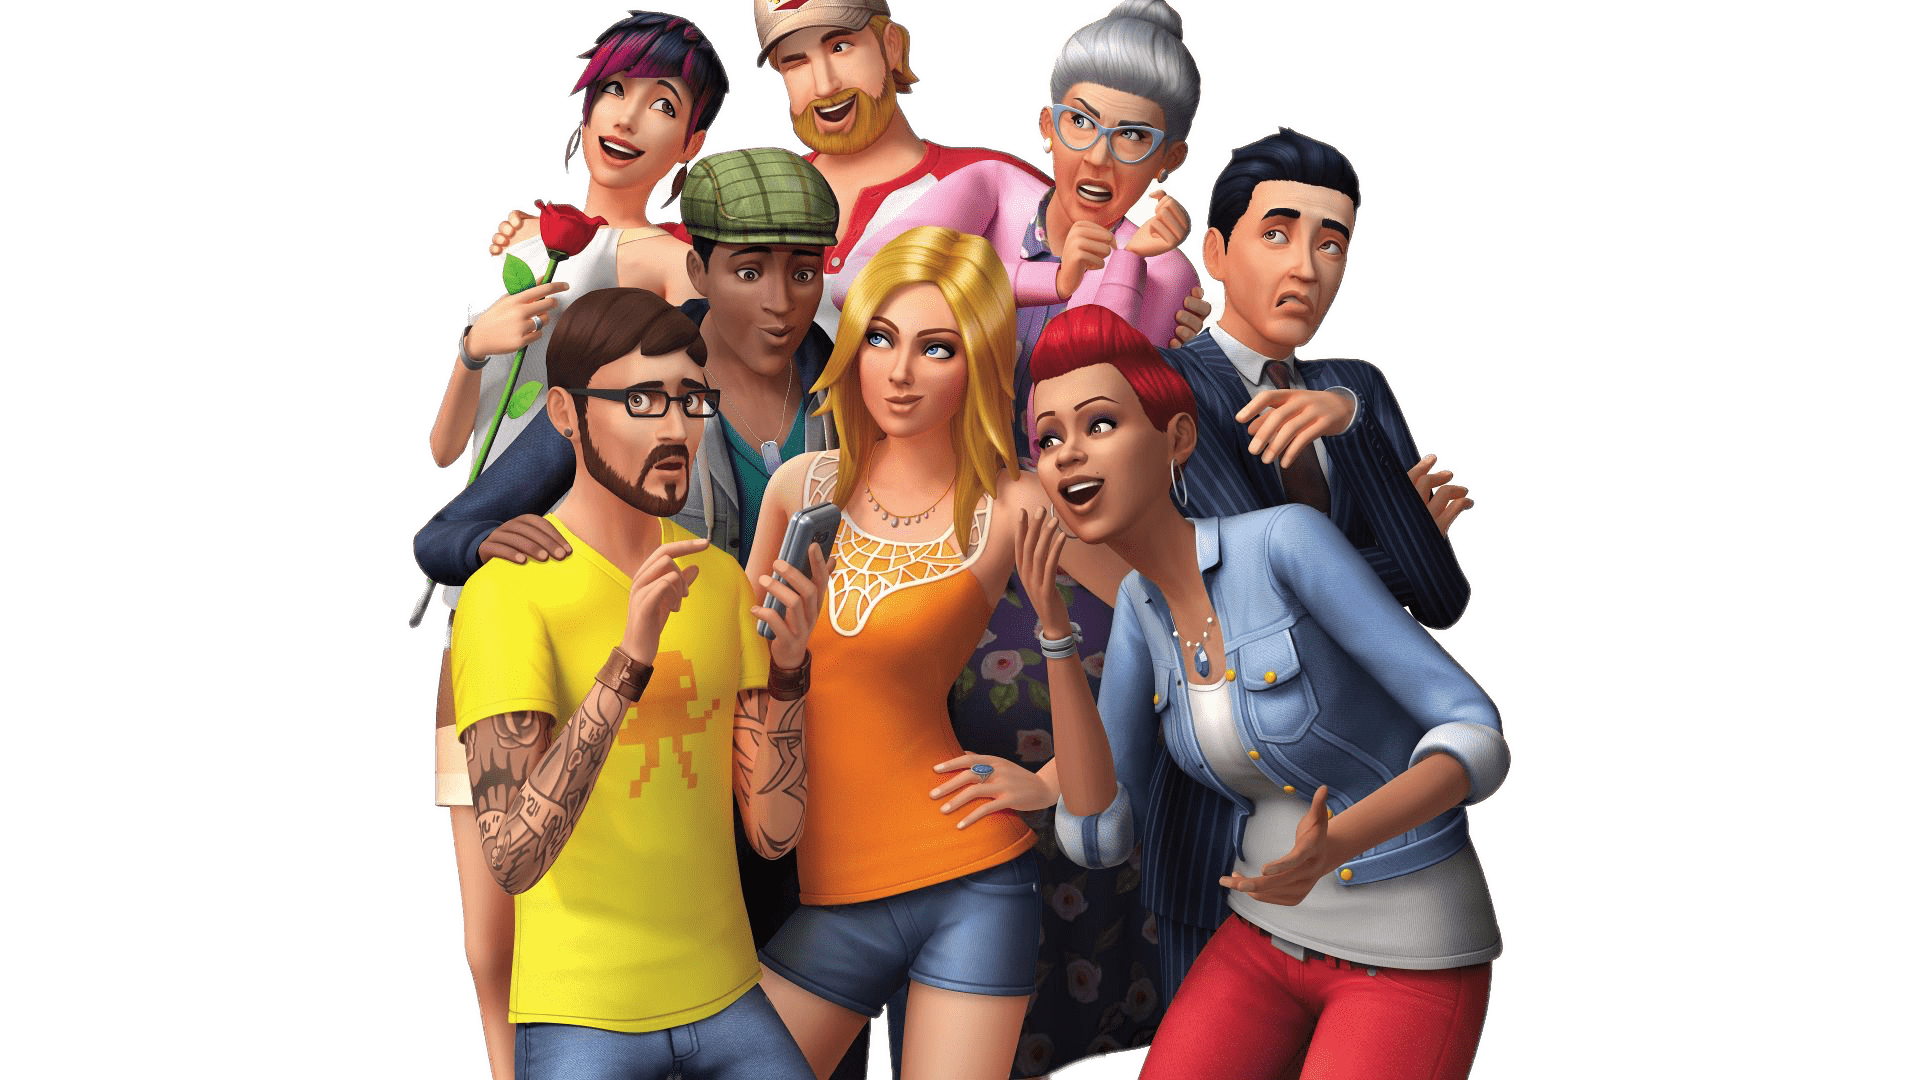 Sims The Pic Characters HQ Image Free PNG Image